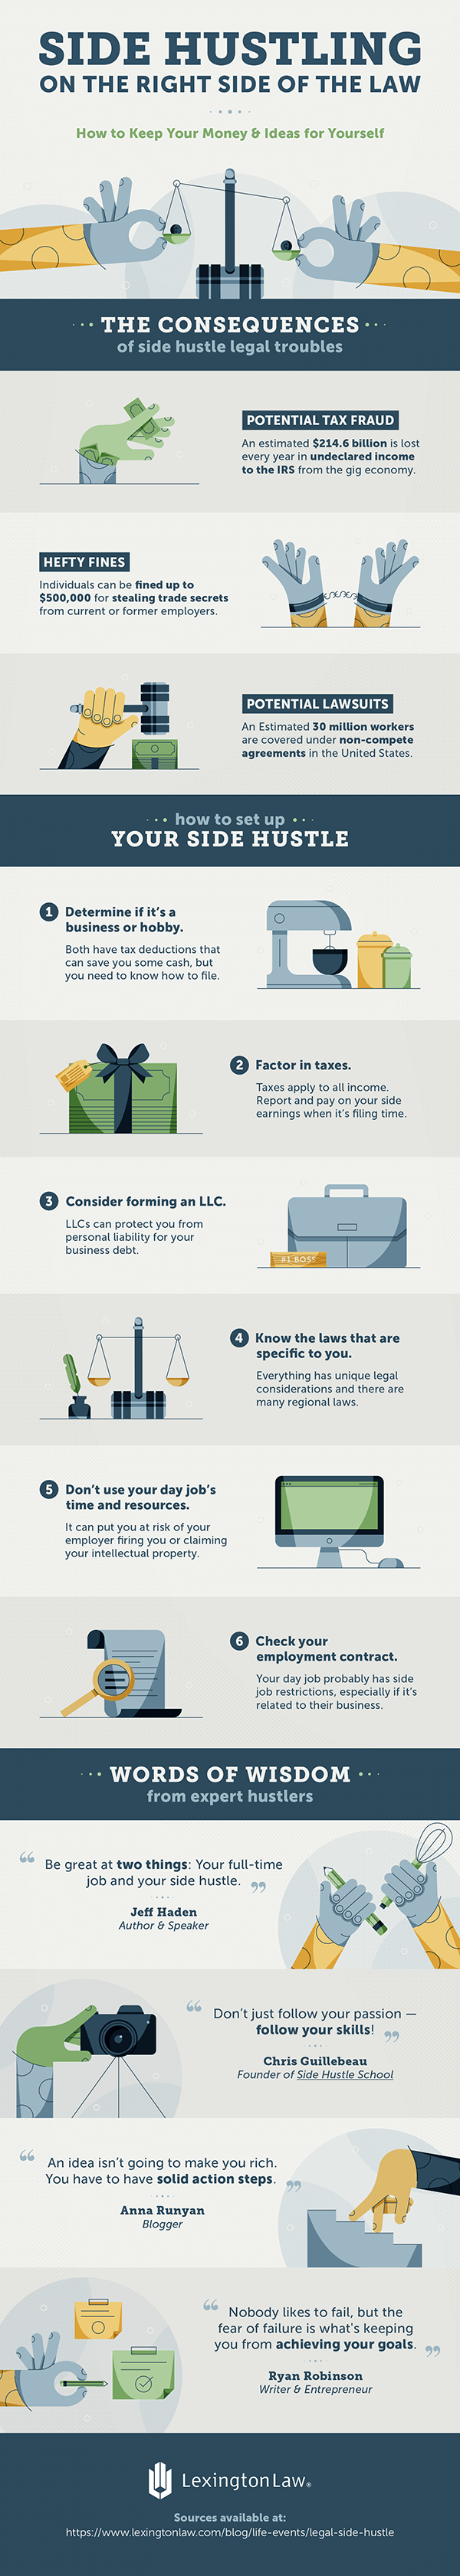 How To Avoid Legal Disasters At Your Side Hustle Infographics